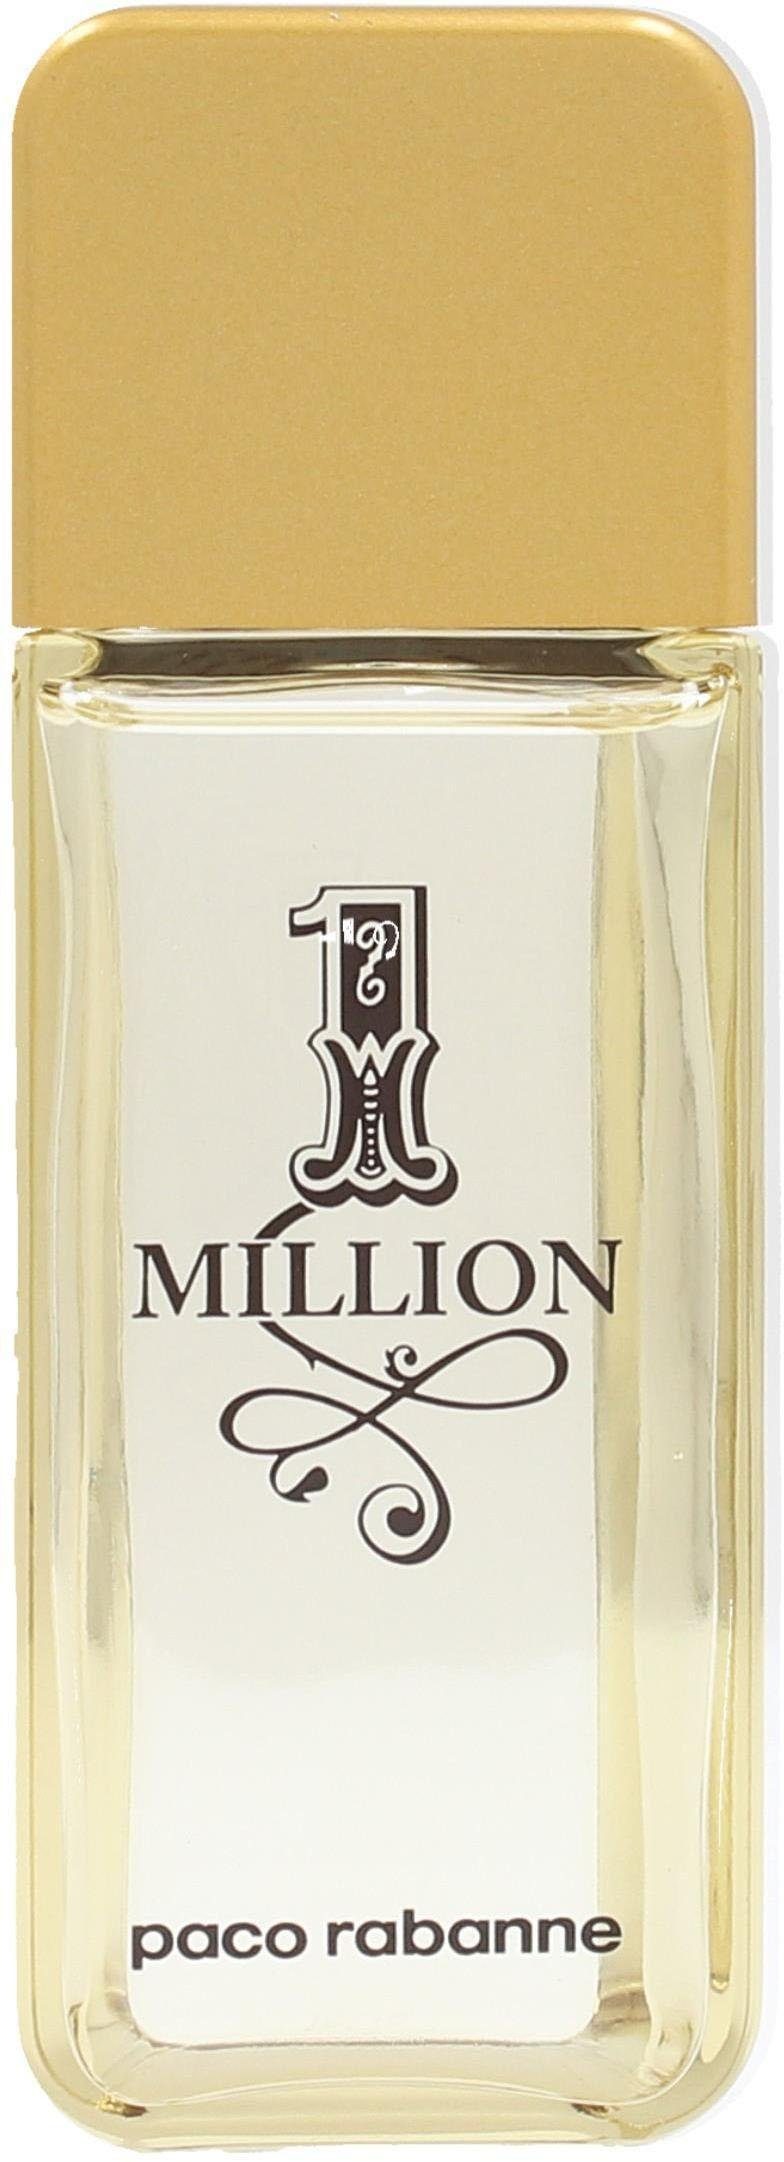 paco rabanne 1 After-Shave Million